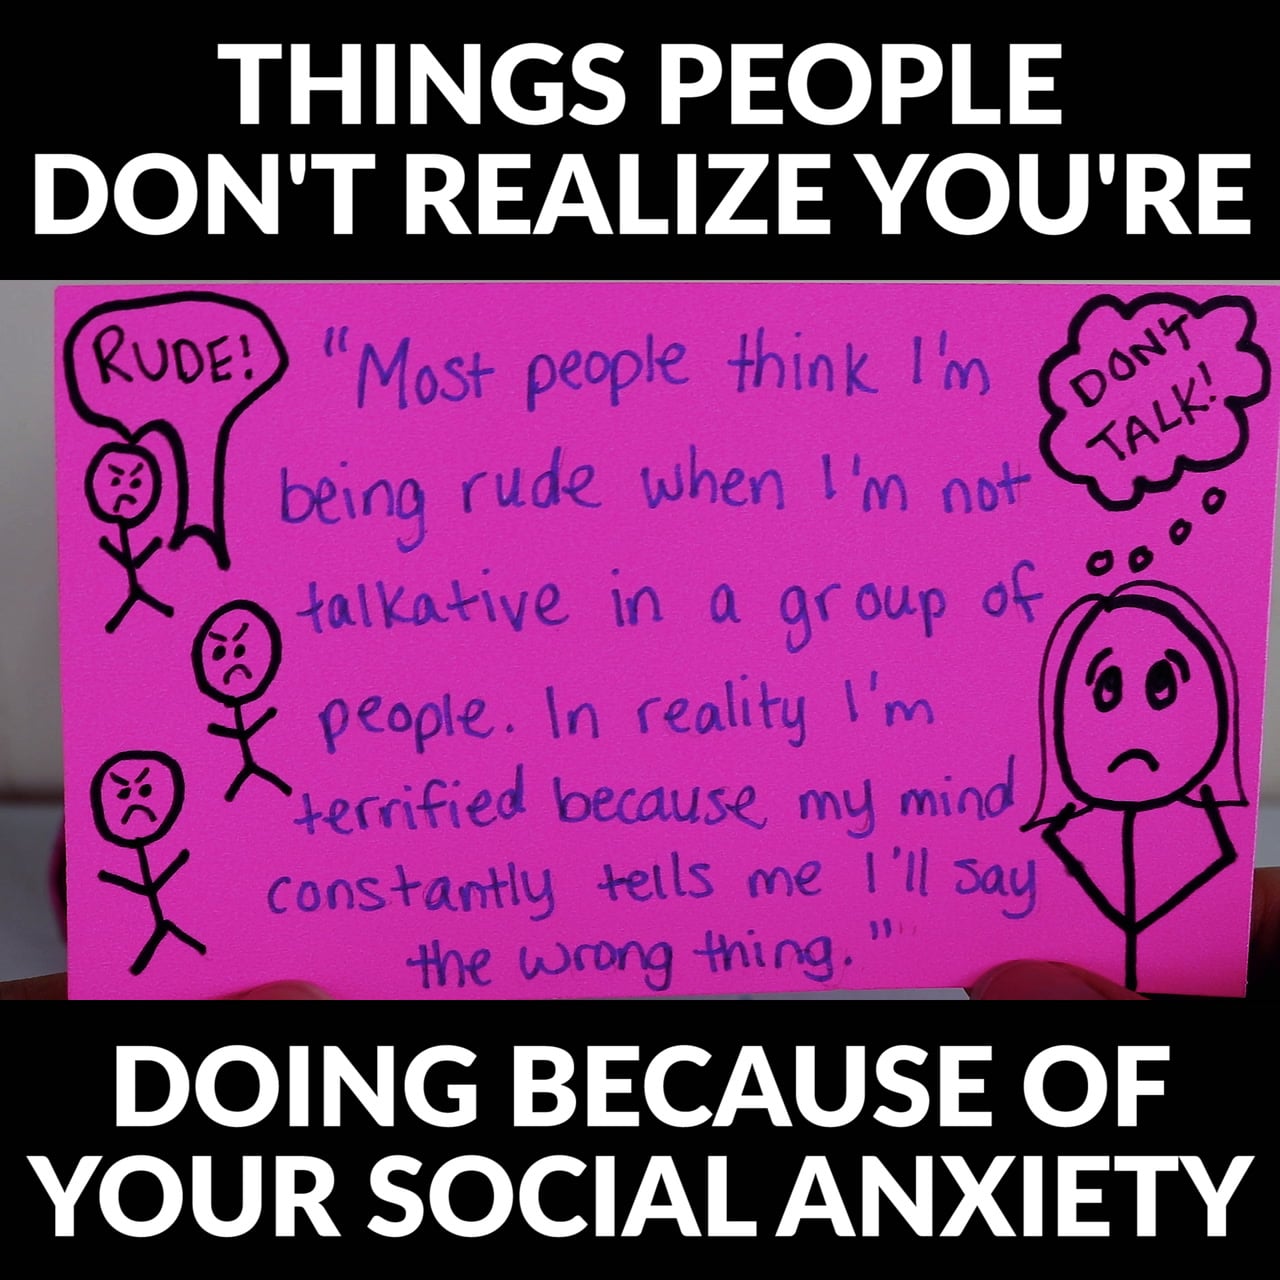 Things People Donât Realize Youâre Doing Because of Your Social Anxiety ...